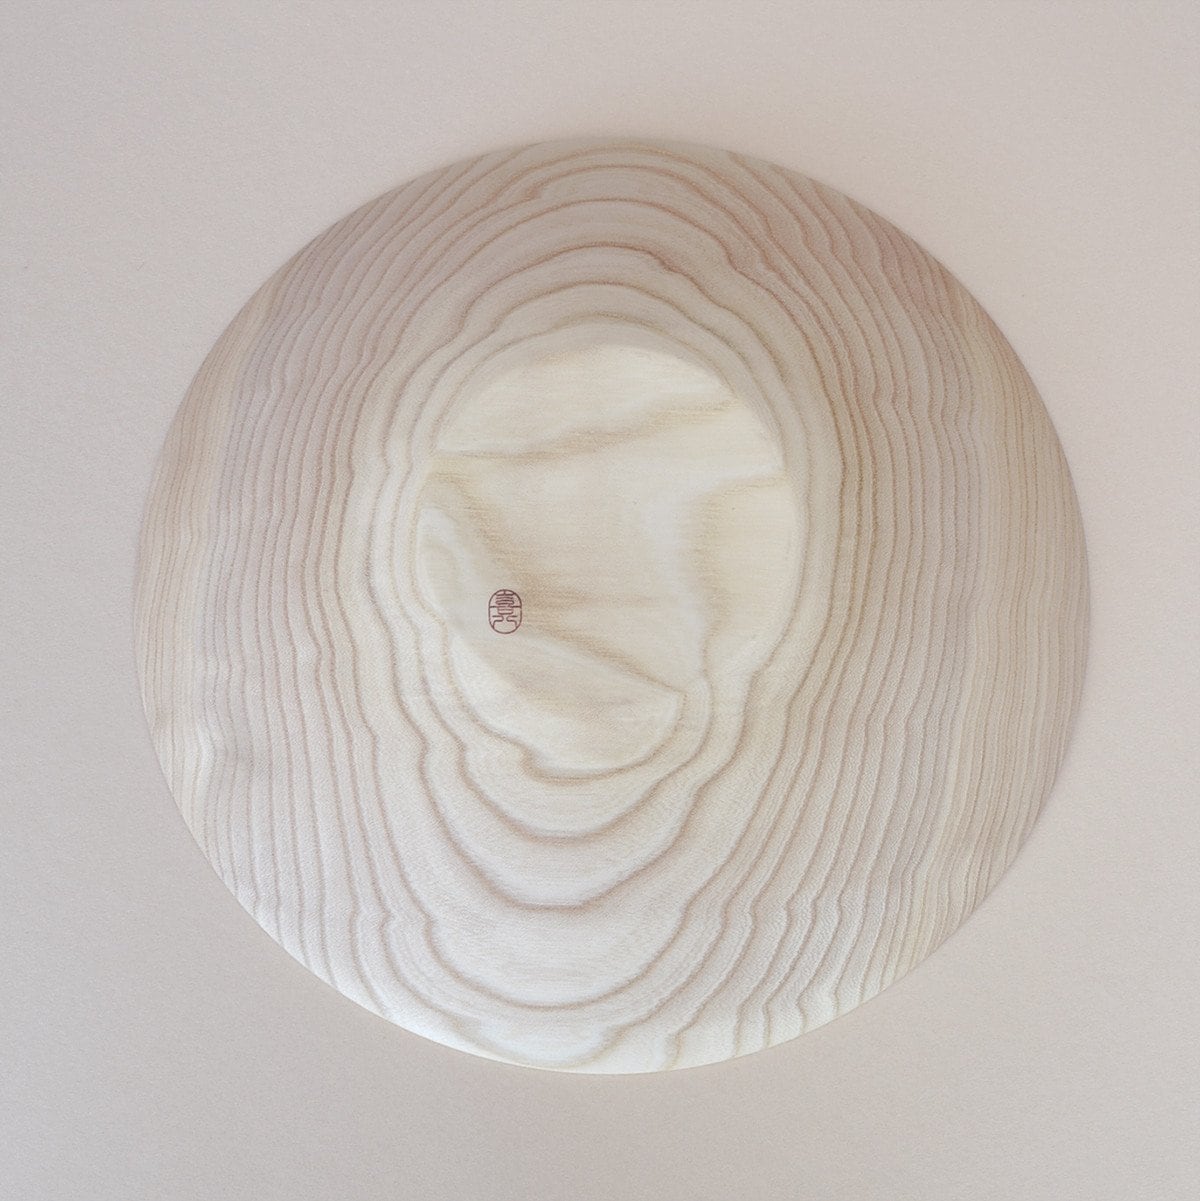 A Kihachi Wooden Plate - Medium on a white surface.